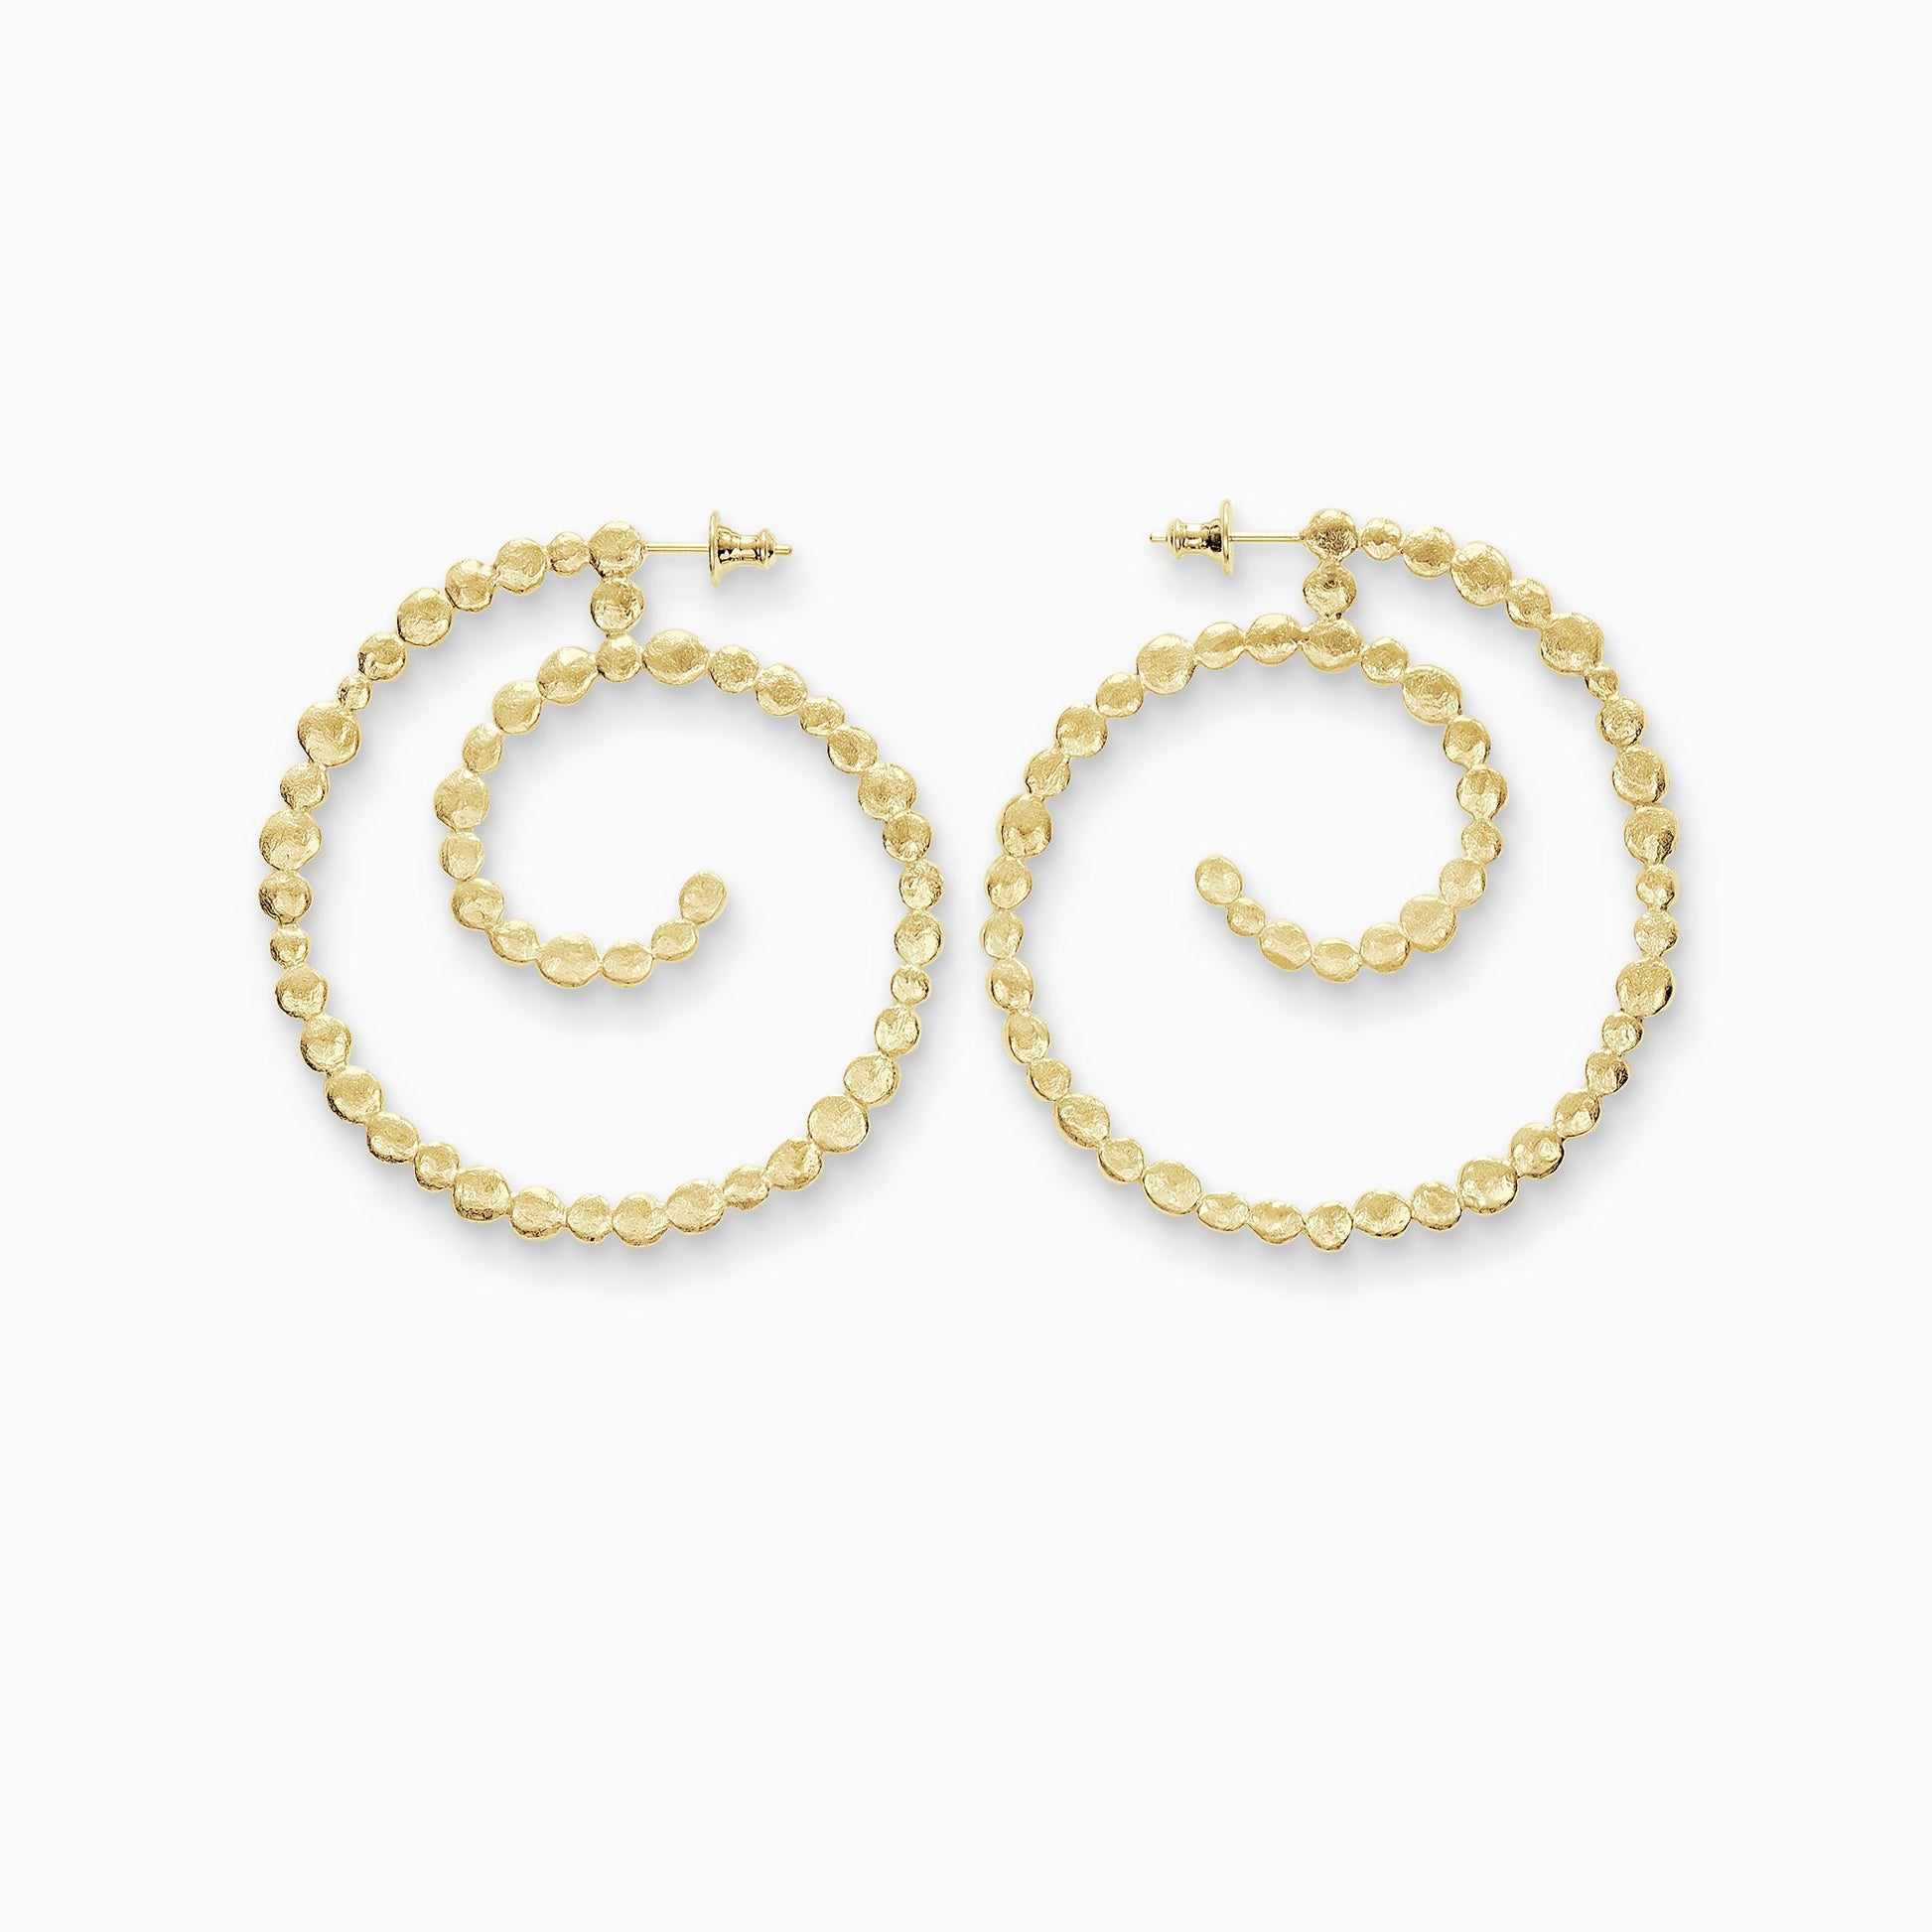 A pair of 18ct Fairtrade yellow gold spiral stud earrings made of tiny undulating textured and connected dots. 54mm outside diameter 